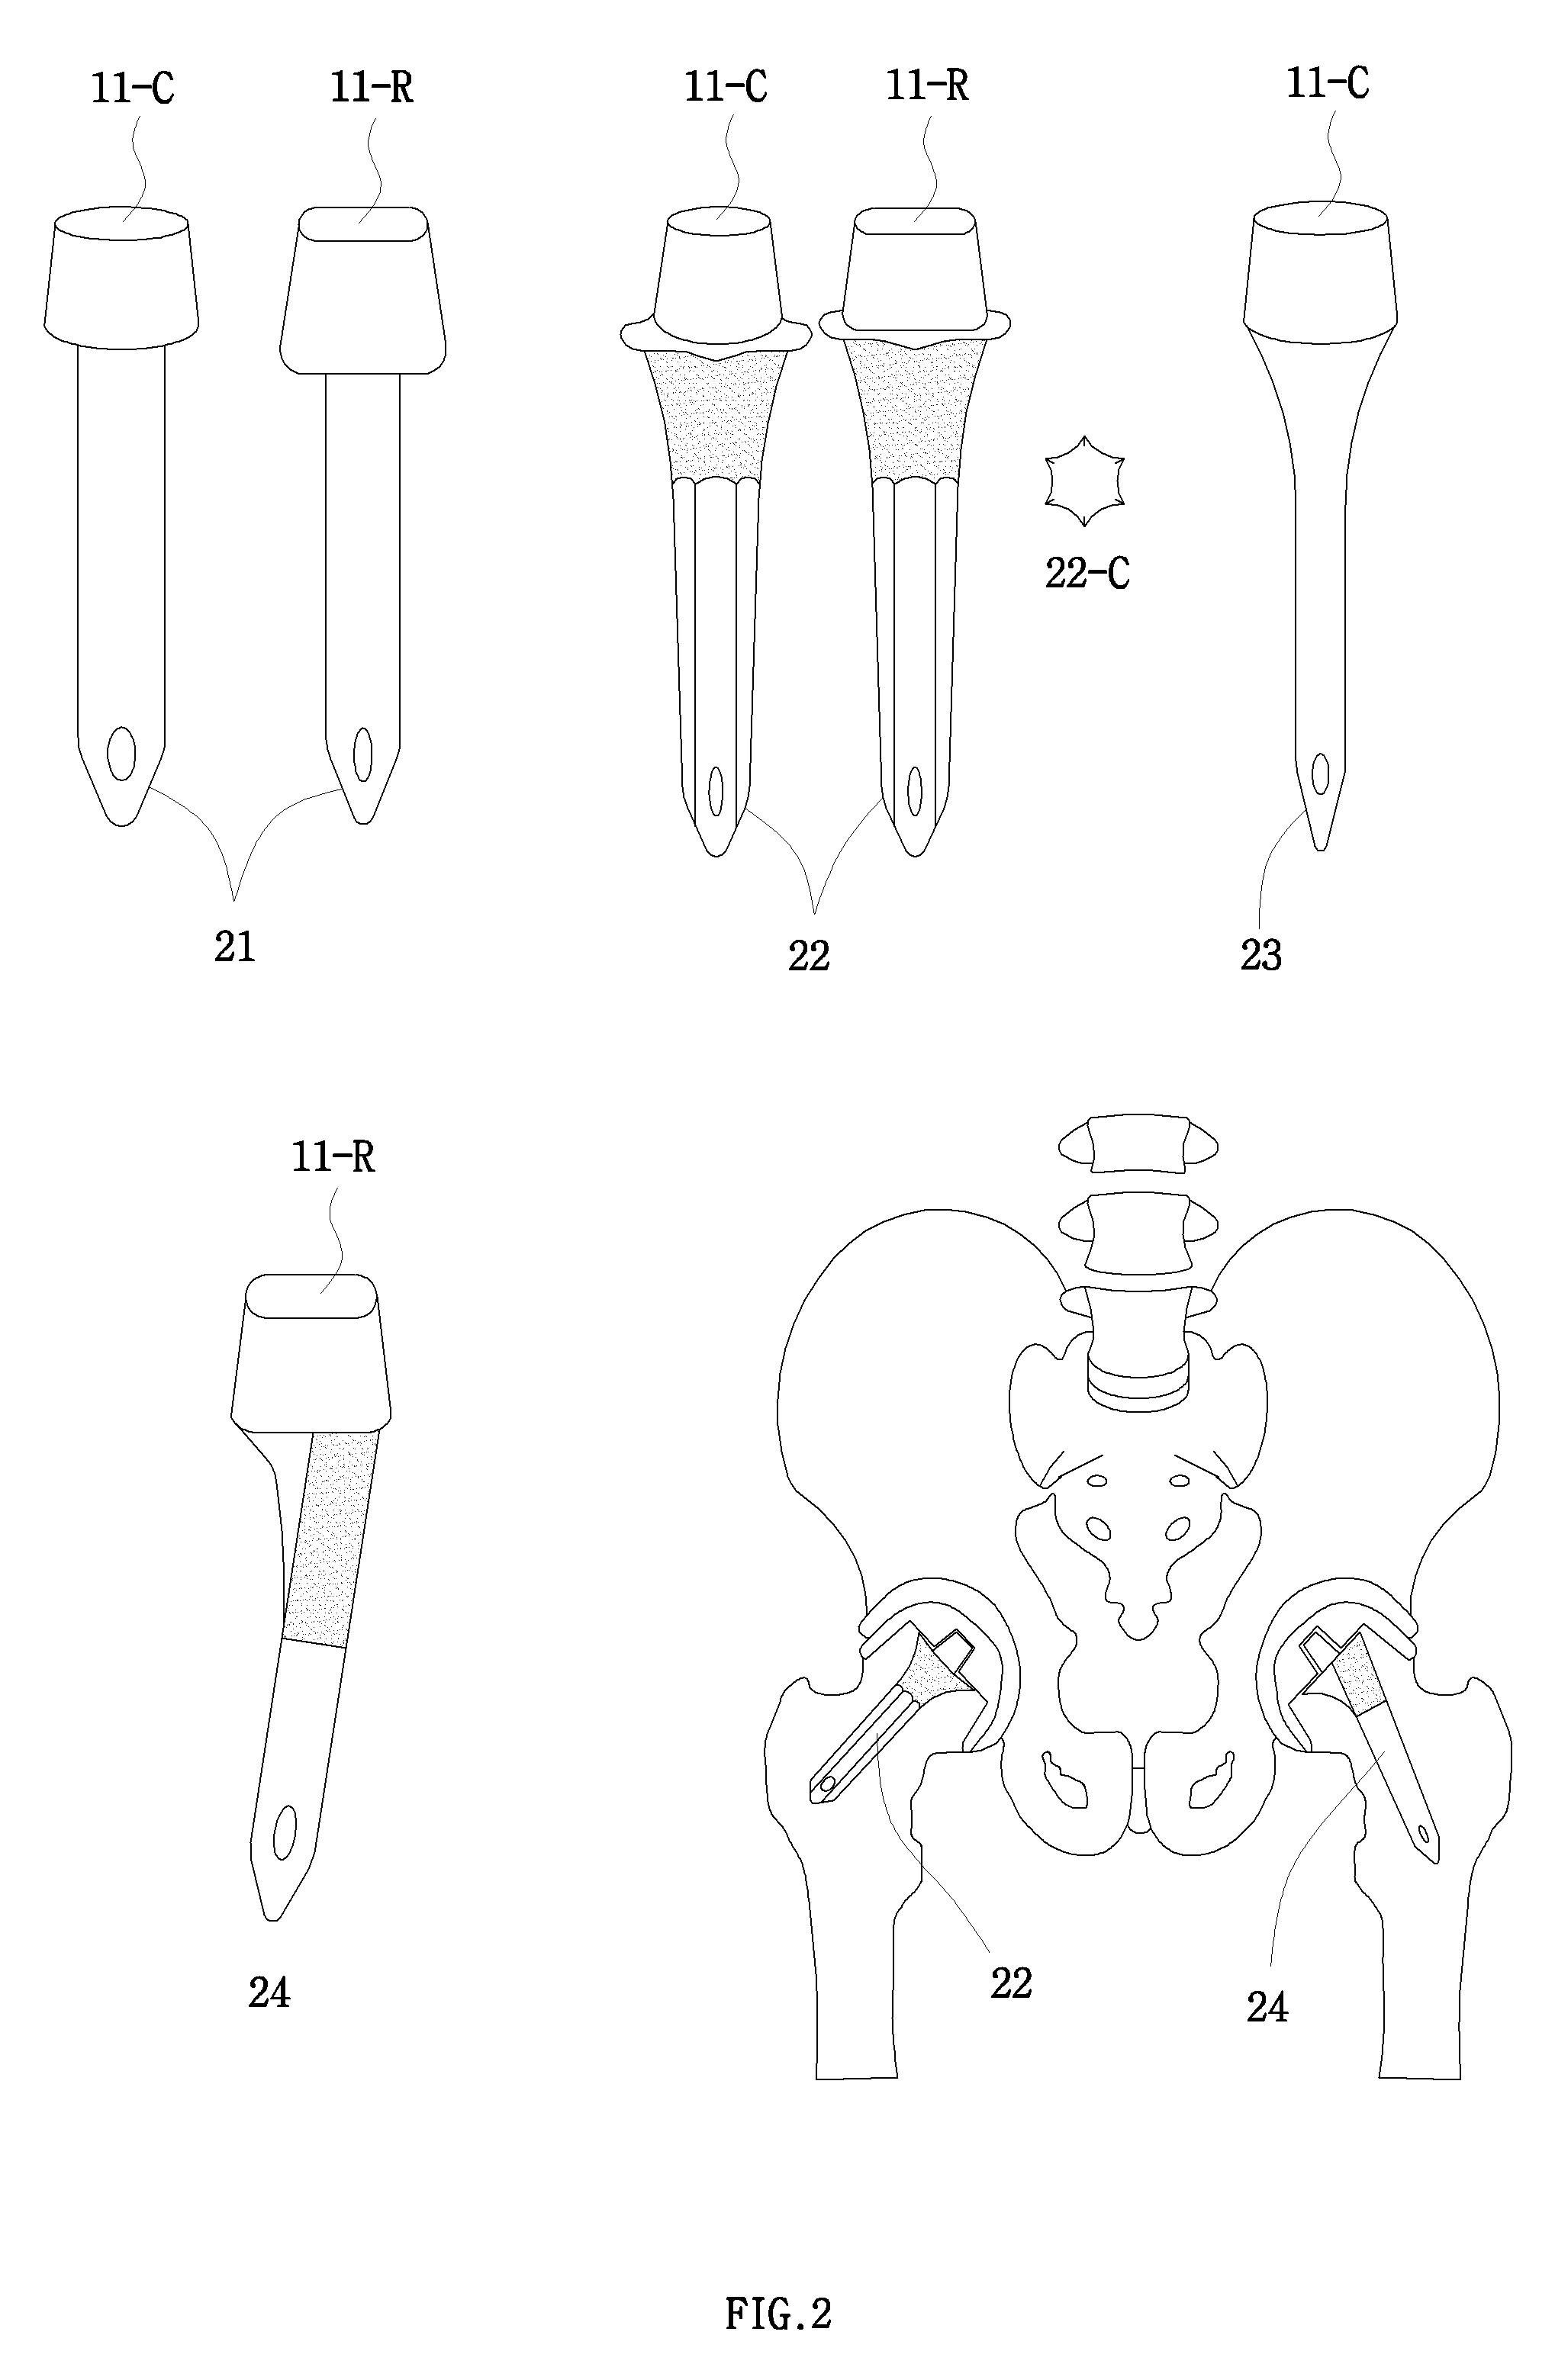 Modular Femoral Head Surface Replacement, Modular Femoral Neck Stem, and Related Sleeve, Adapter, and Osteoconducting Rod